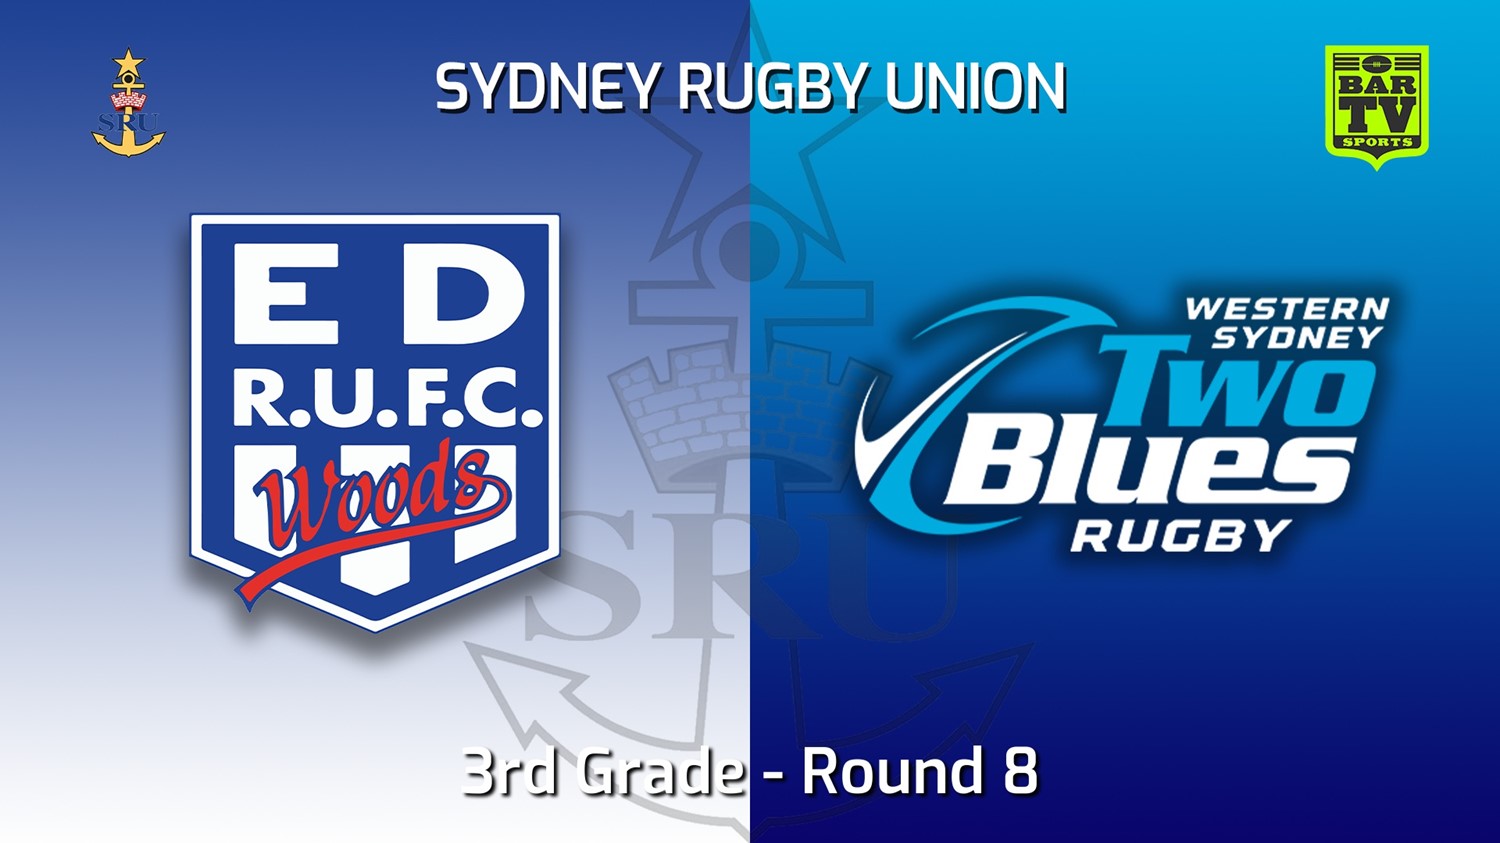 220521-Sydney Rugby Union Round 8 - 3rd Grade - Eastwood v Two Blues Slate Image